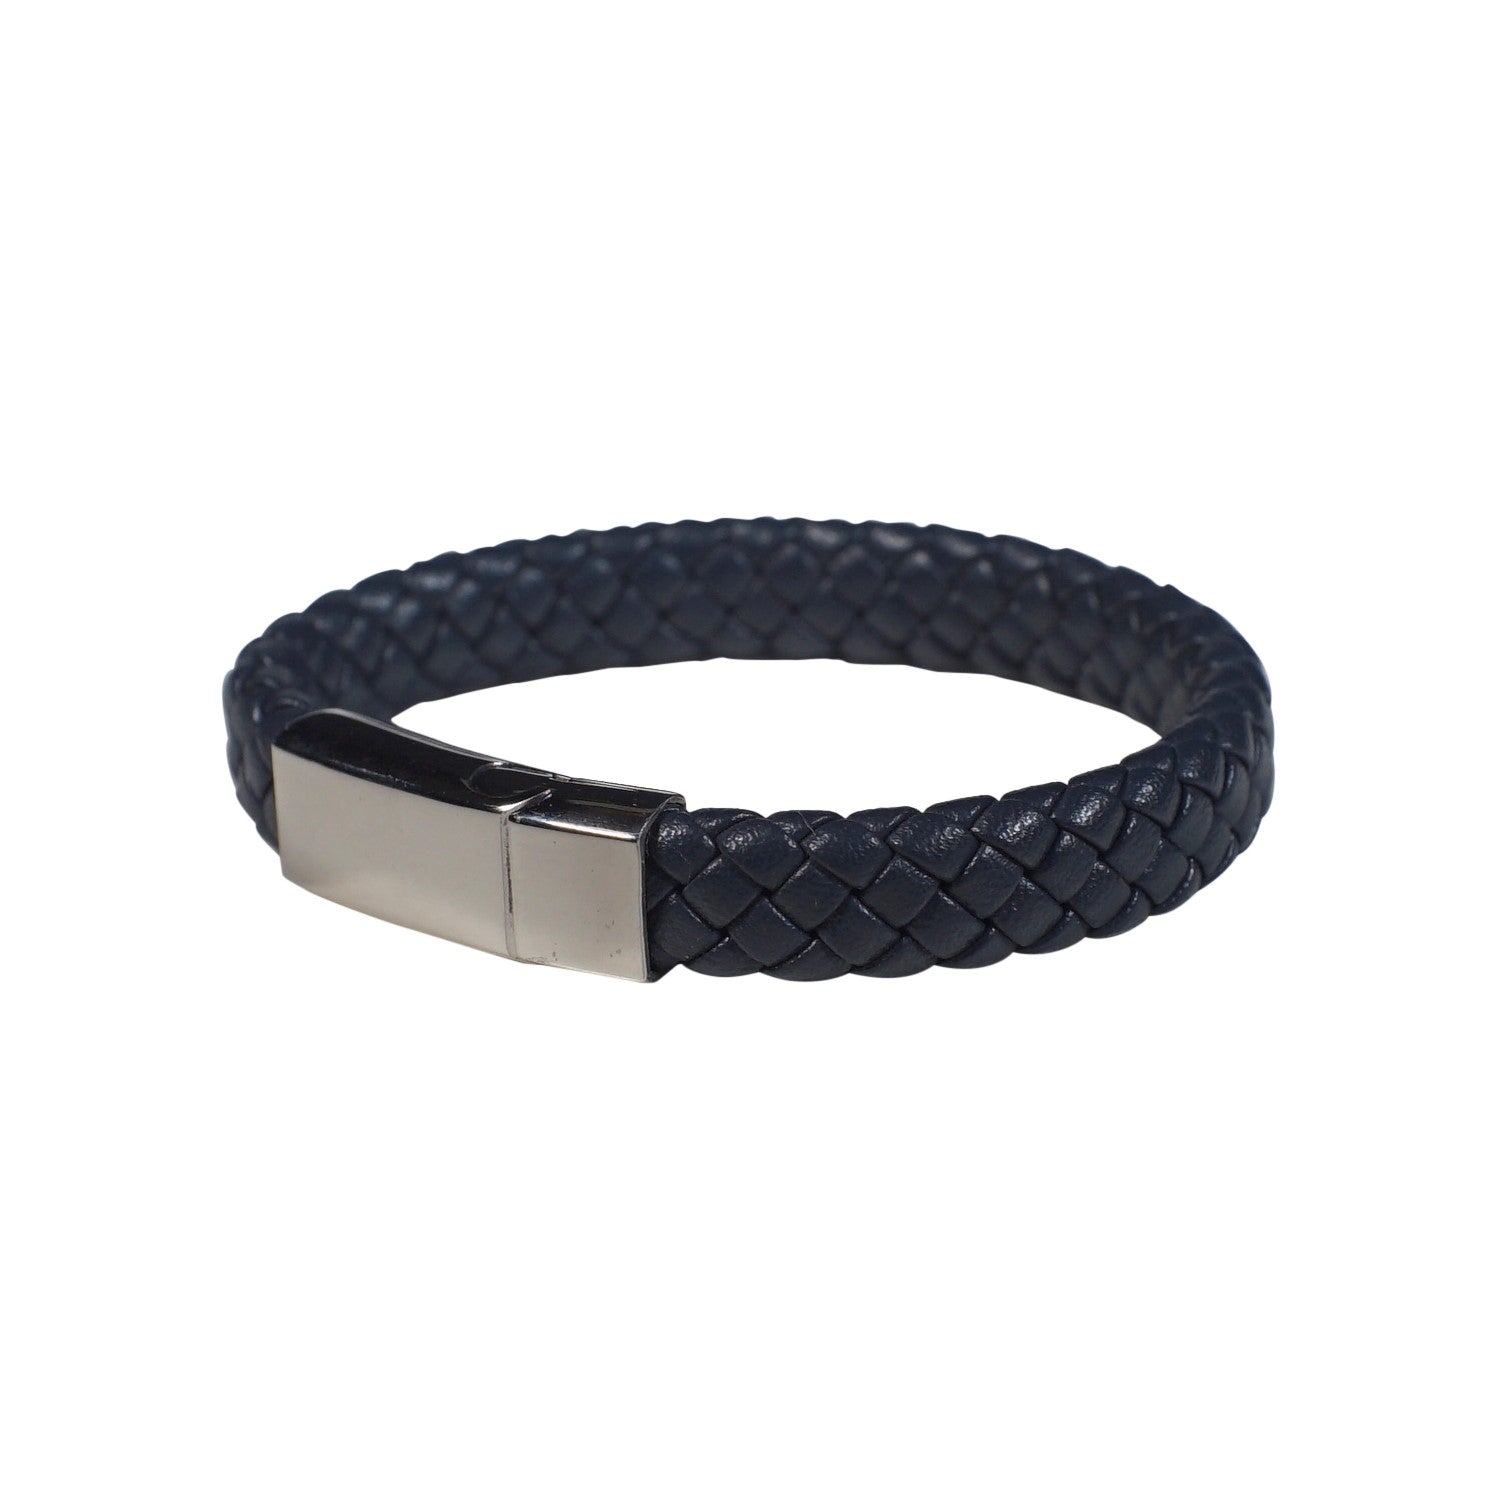 Chester Leather Bracelet in Navy (Size L) - Nomad watch Works